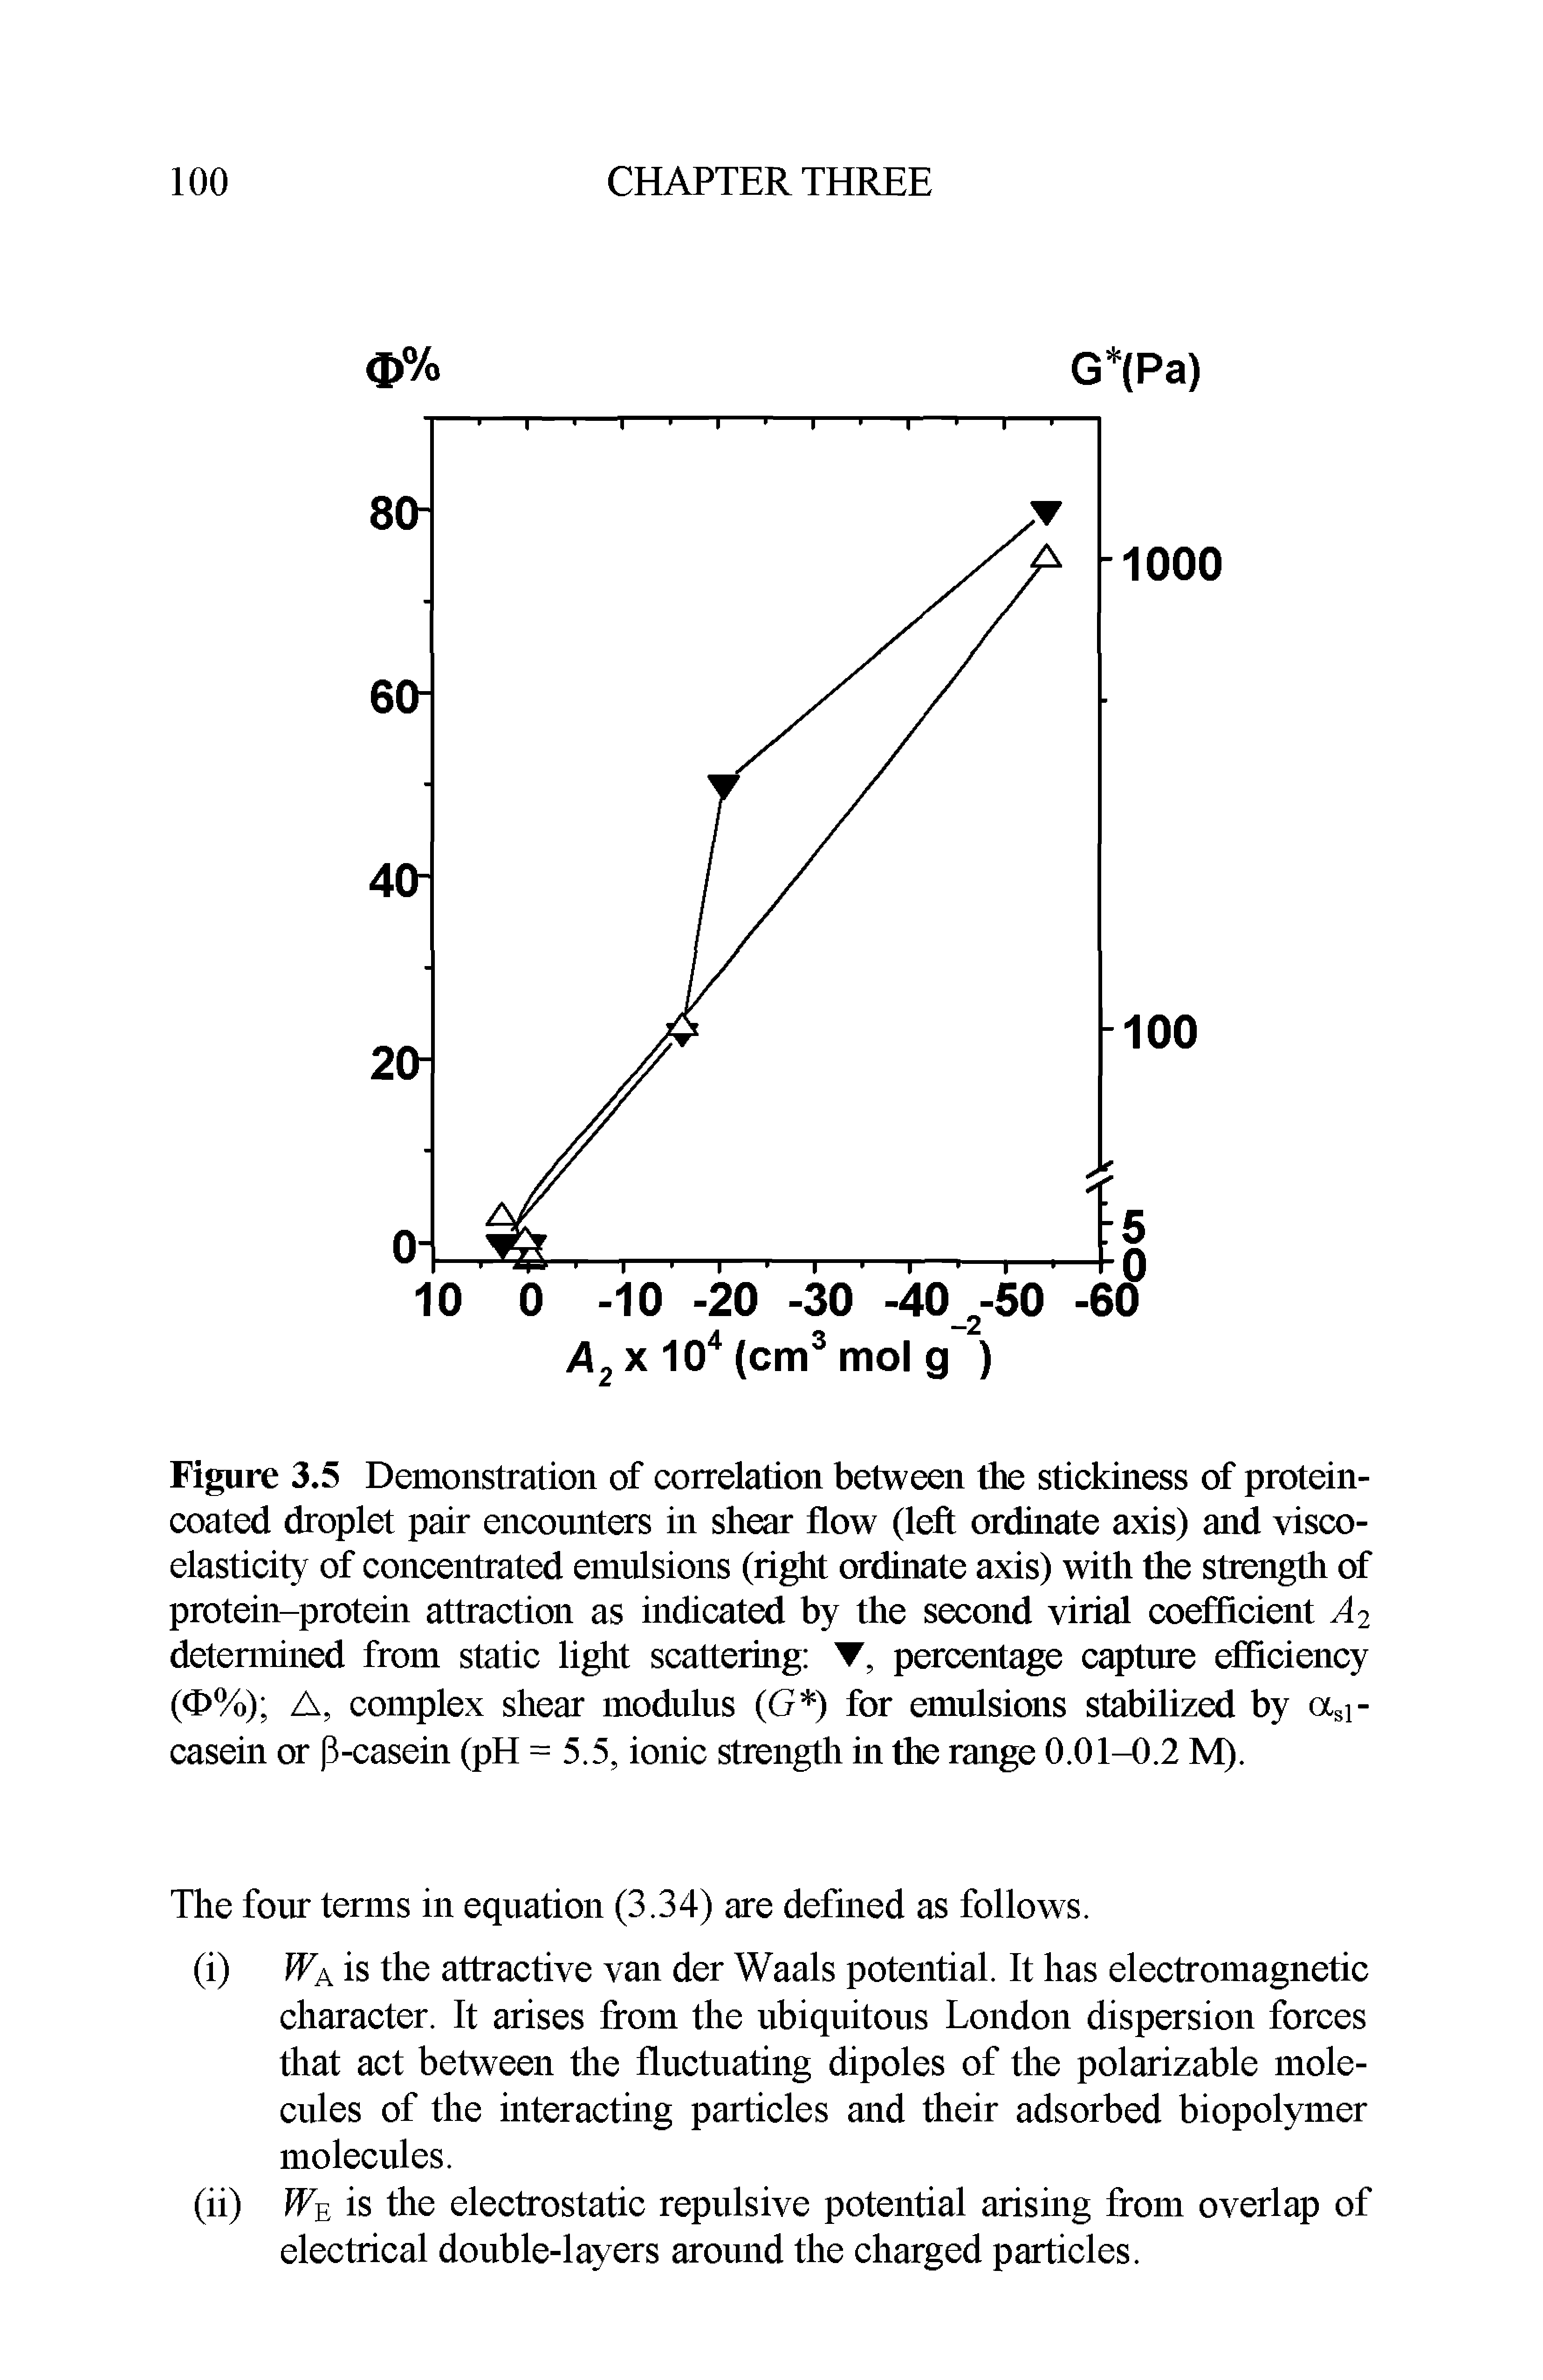 Figure 3.5 Demonstration of correlation between the stickiness of protein-coated droplet pair encounters in shear flow (left ordinate axis) and viscoelasticity of concentrated emulsions (right ordinate axis) with the strength of protein-protein attraction as indicated by the second virial coefficient A2 determined from static light scattering , percentage capture efficiency (0%) A, complex shear modulus (G ) for emulsions stabilized by asl-casein or (3-casein (pH = 5.5, ionic strength in the range 0.01-0.2 M).